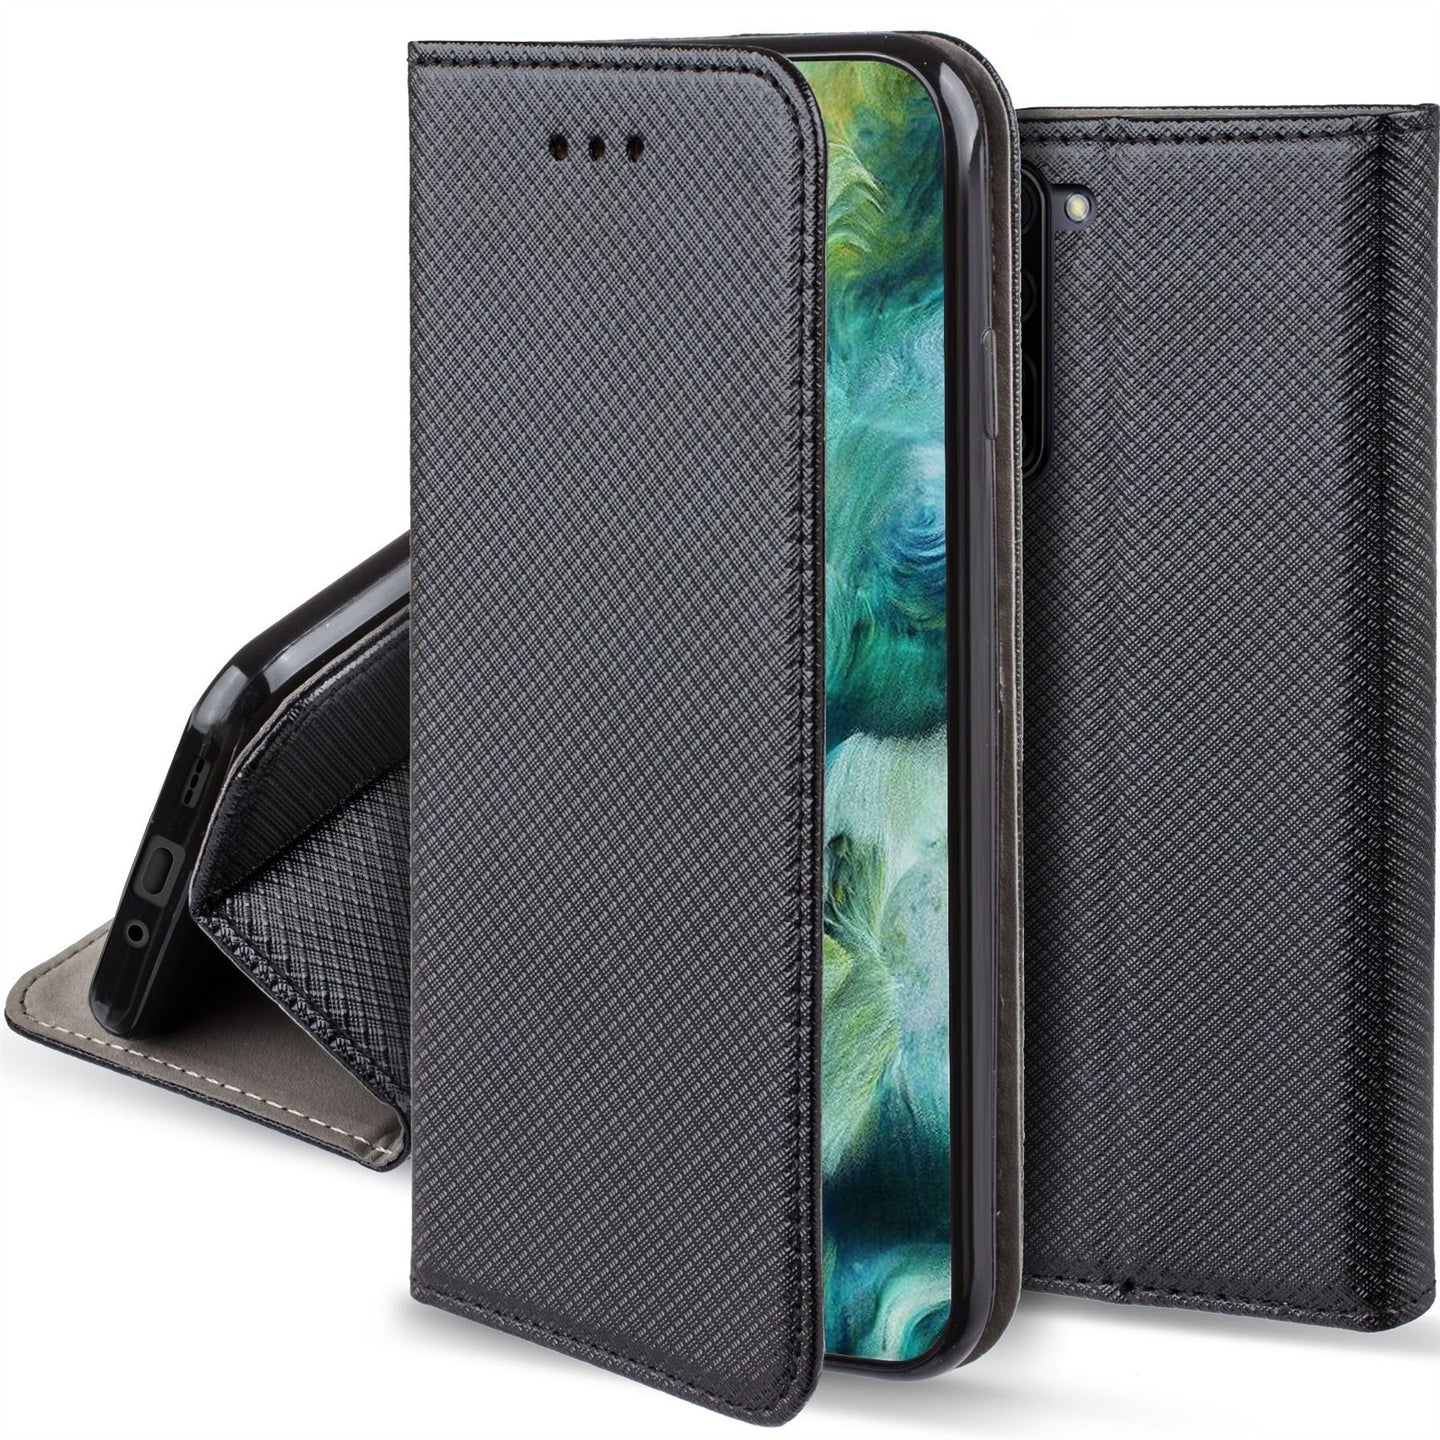 Moozy Case Flip Cover for Oppo Find X2 Lite, Black - Smart Magnetic Flip Case with Card Holder and Stand